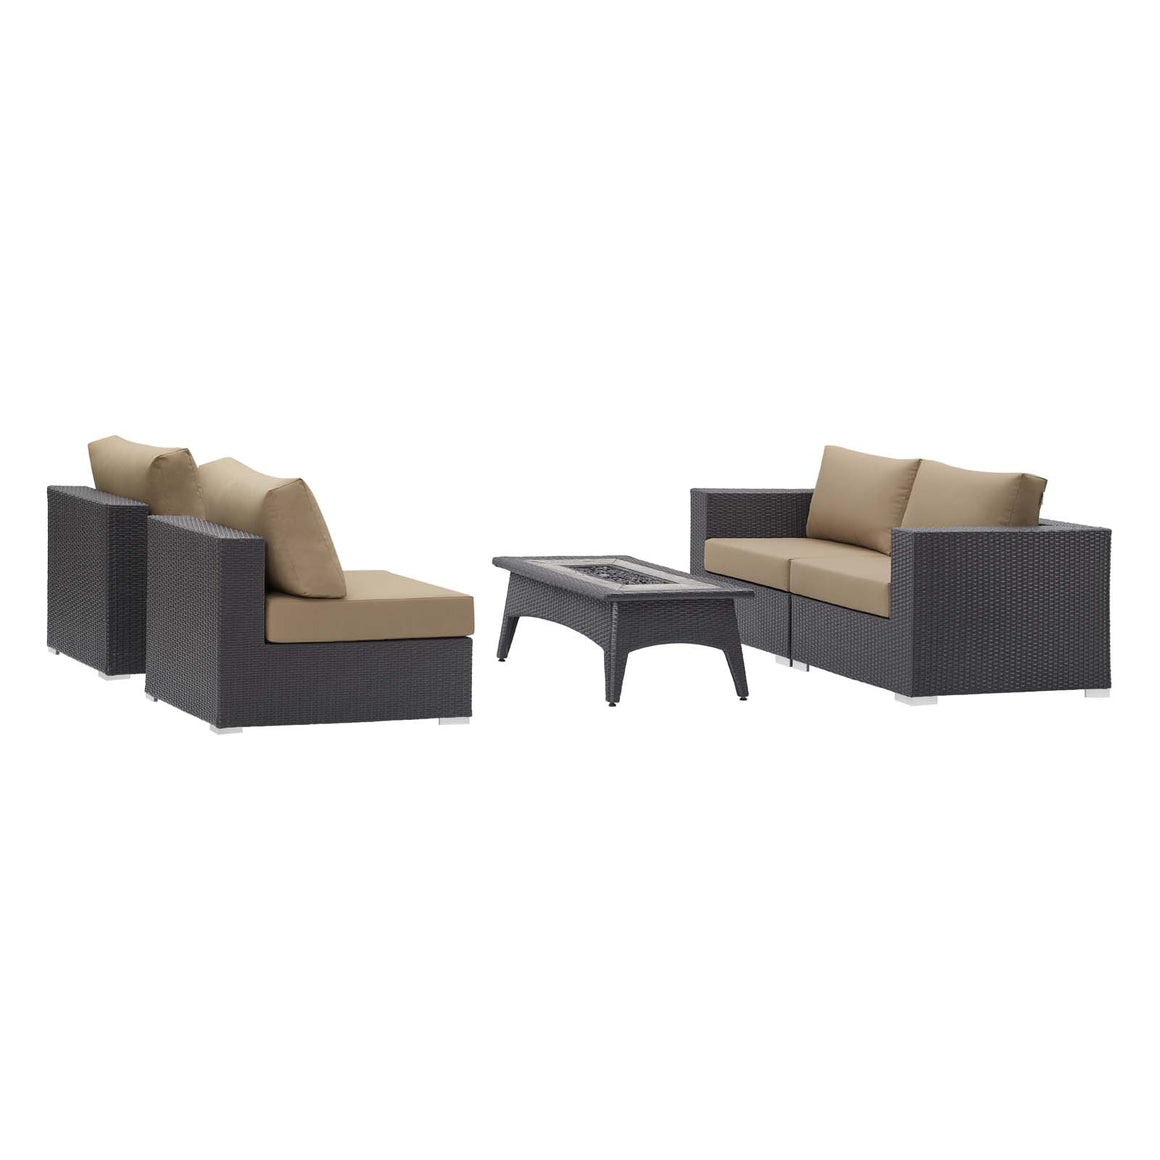 Convene 5 Piece Set Outdoor Patio  with Fire Pit